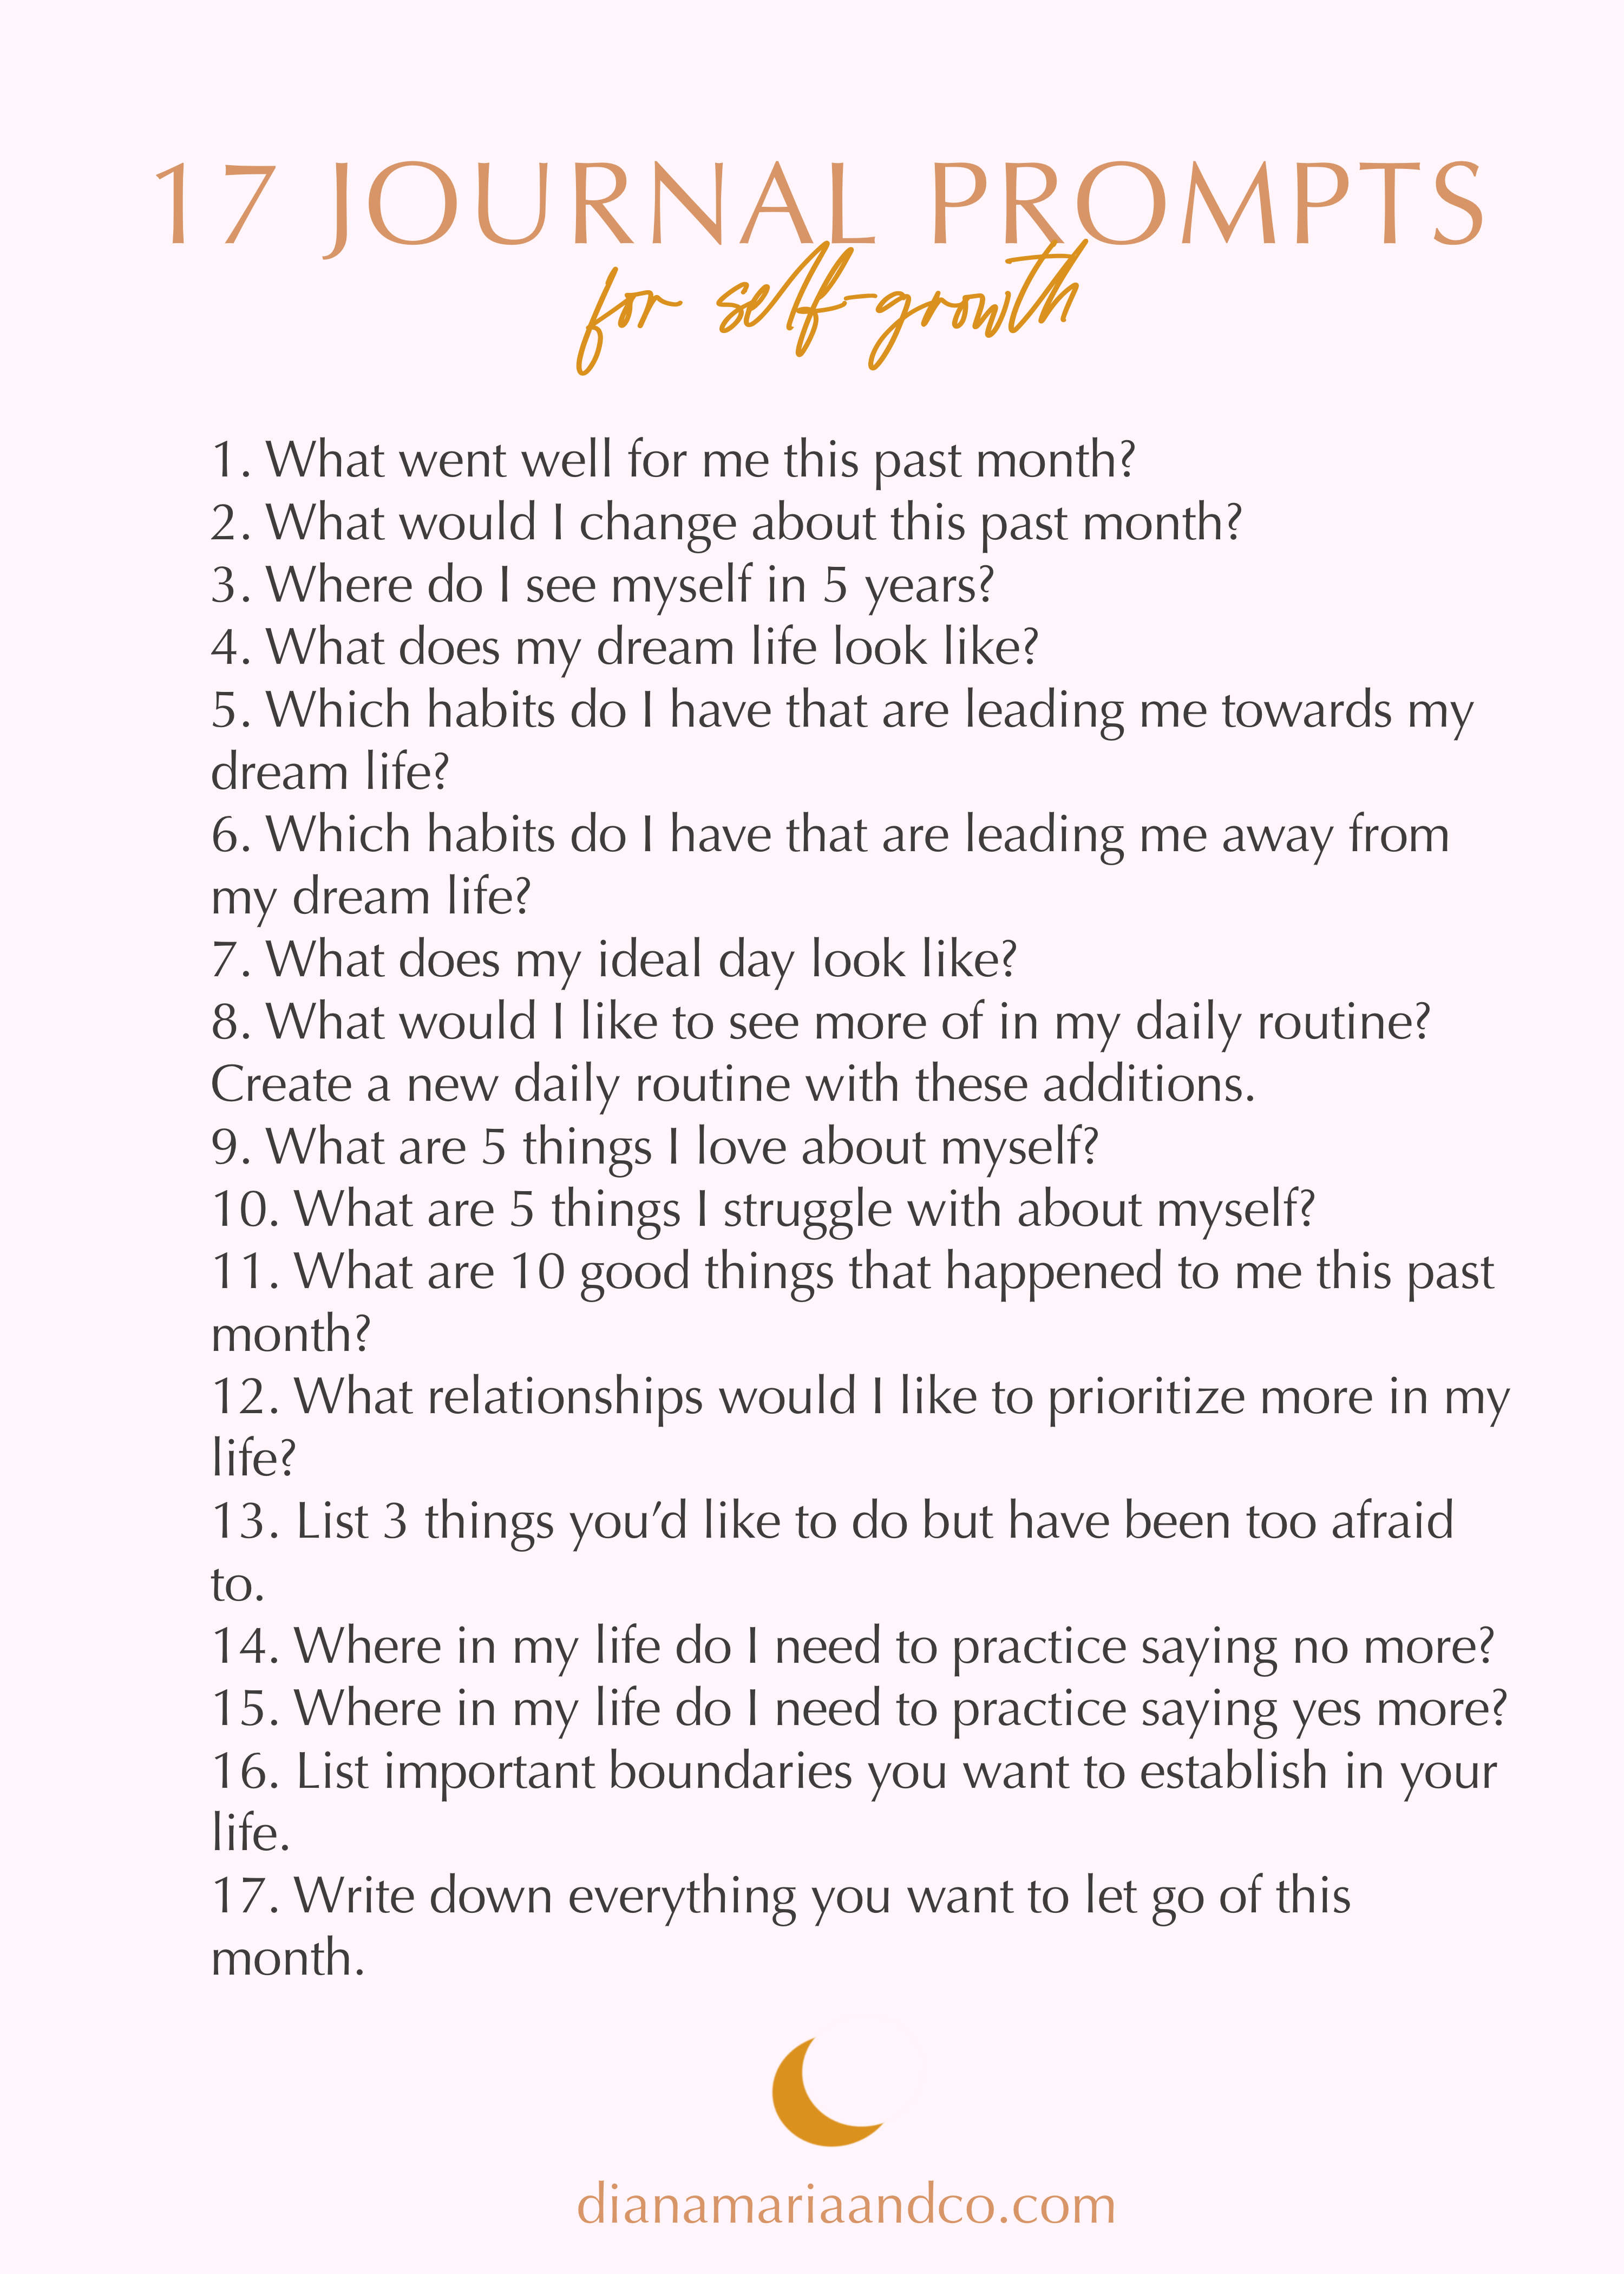 17 Journal Prompts For Self Growth - Diana Maria & Co